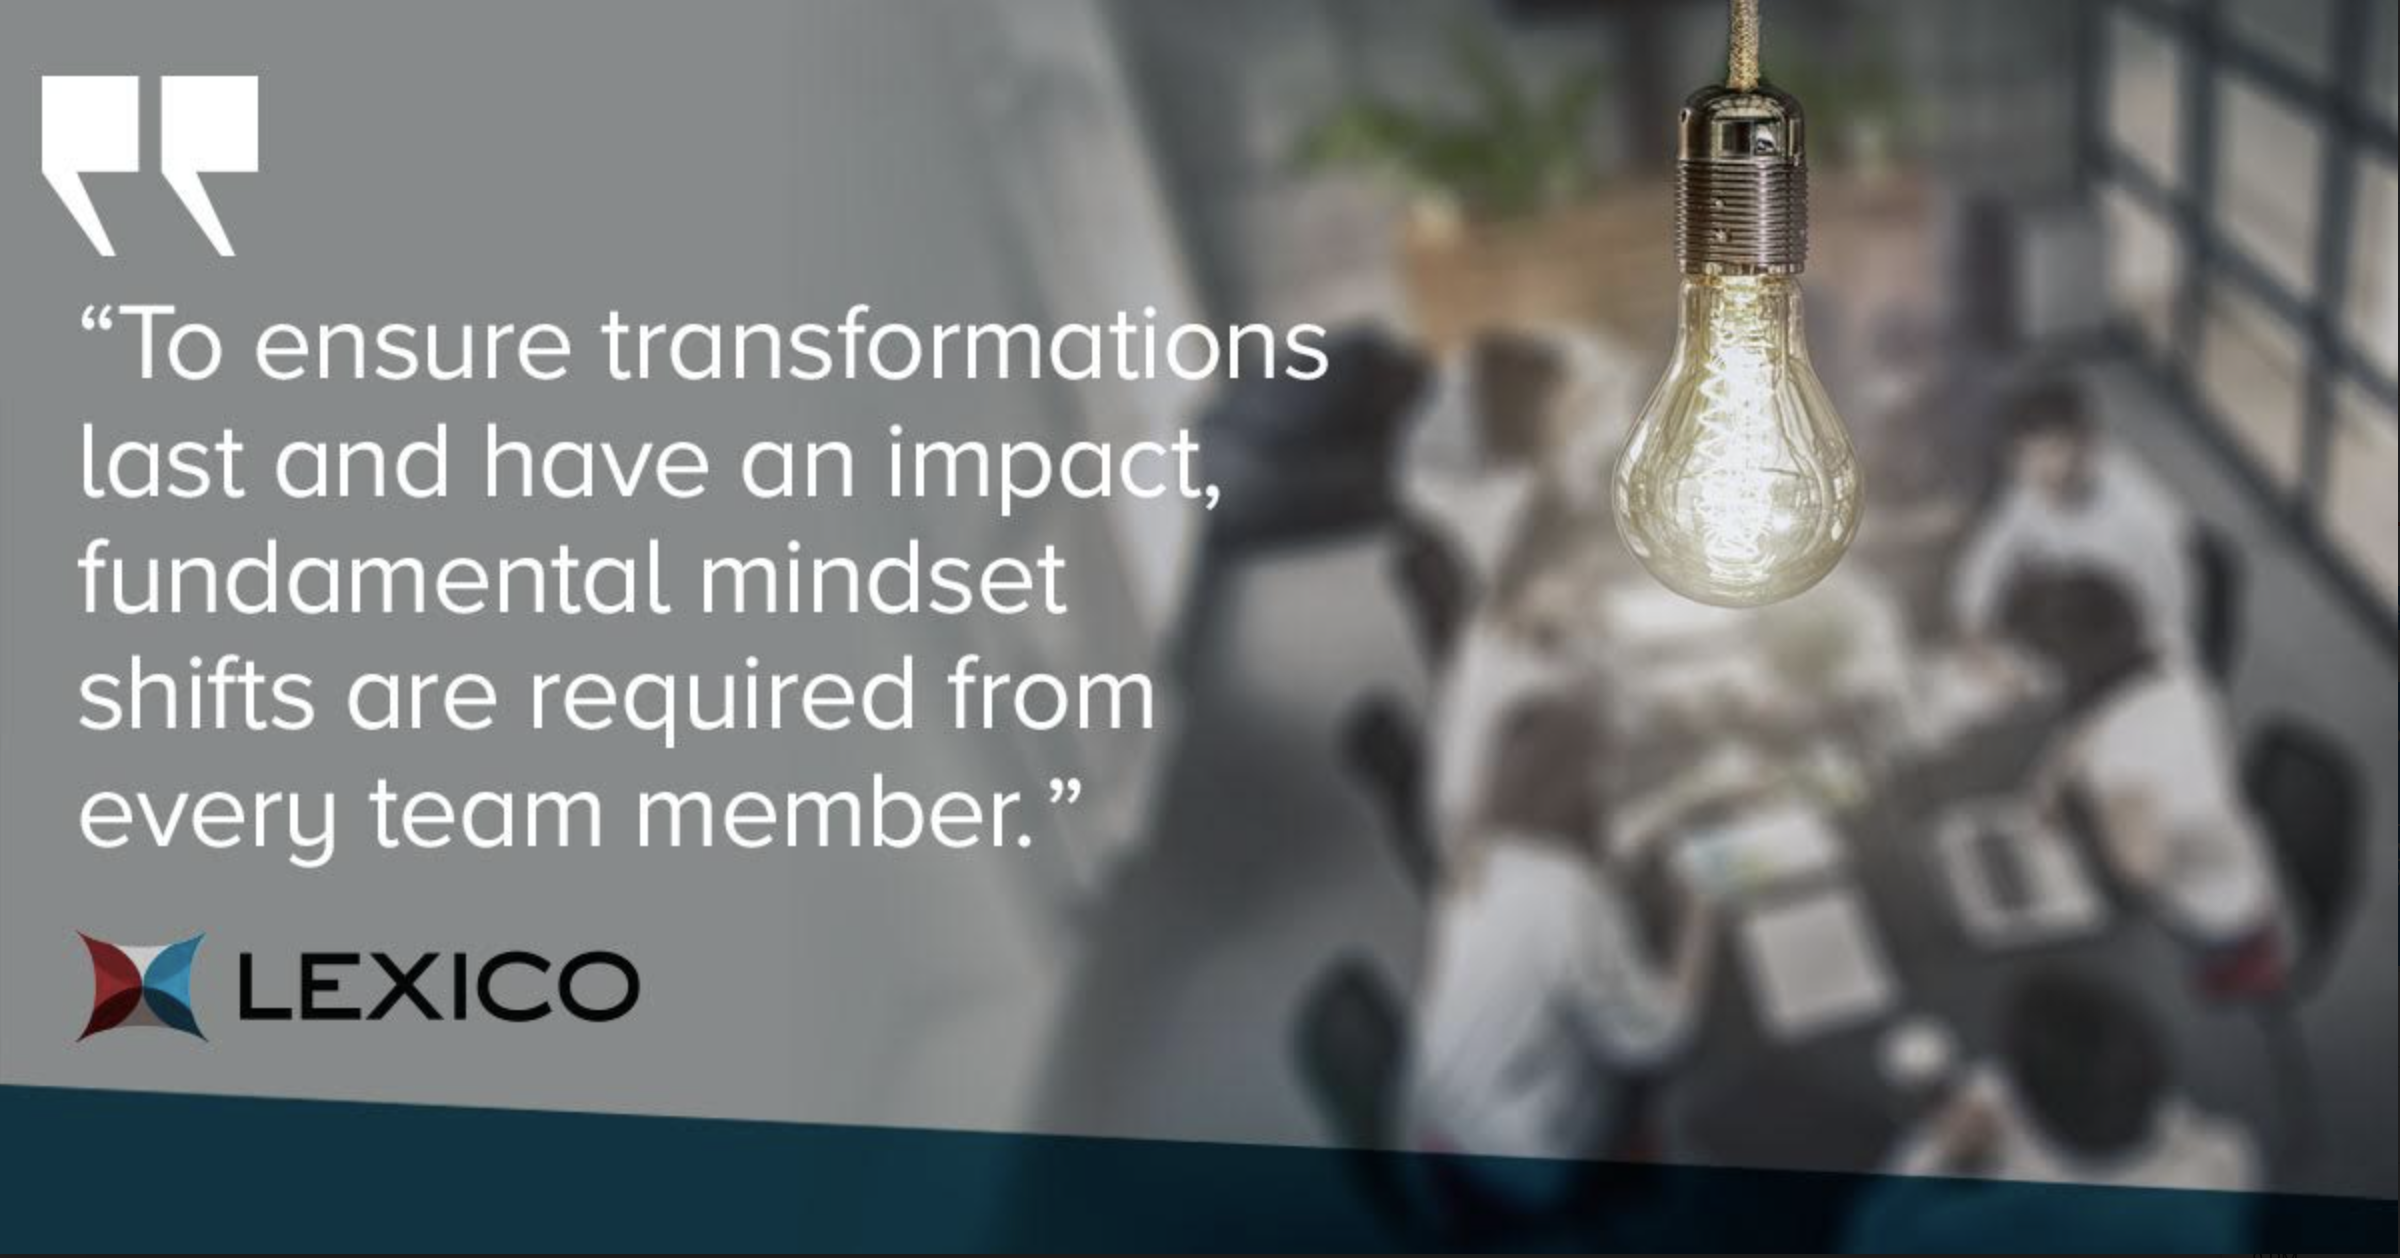 Team member mindset is key to a successful transformation.